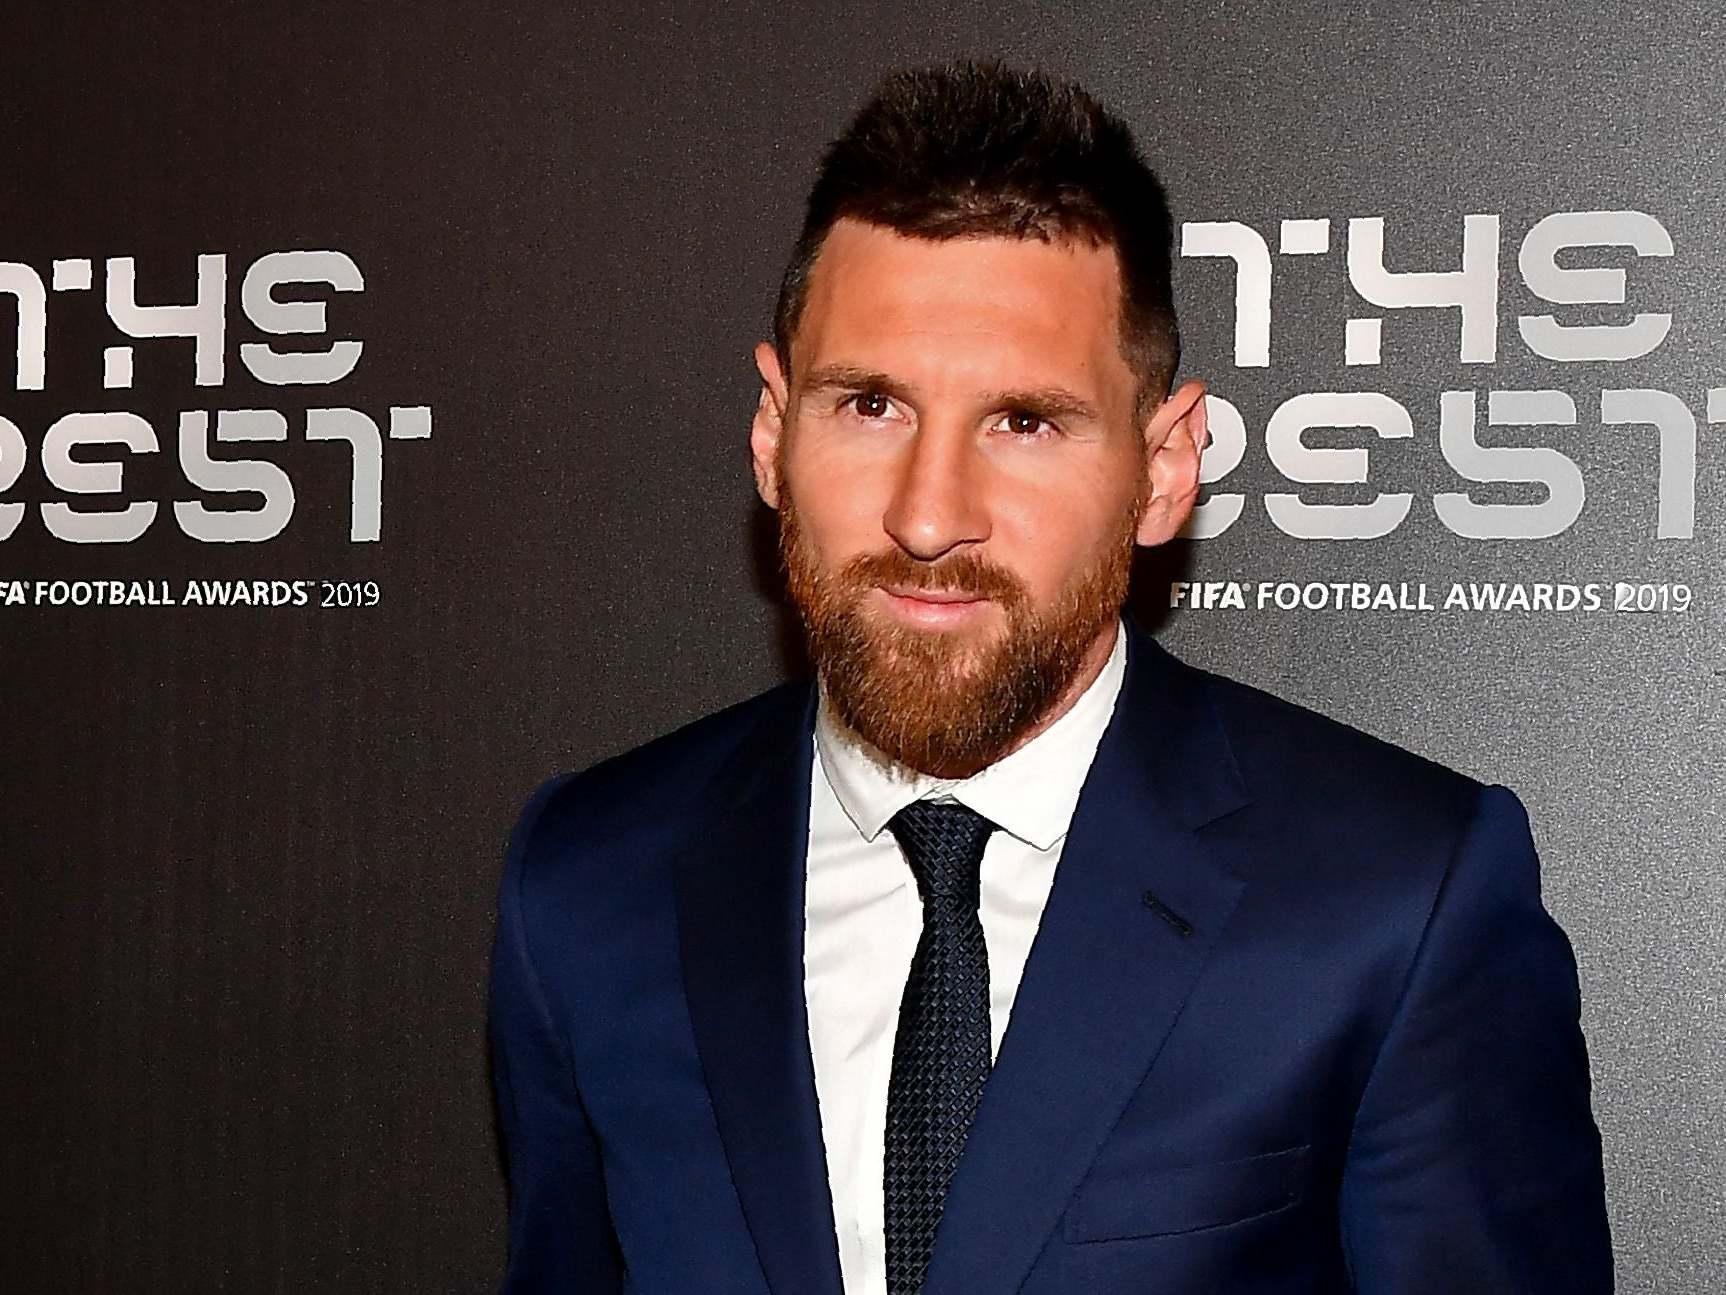 Lionel Messi arrives at the ceremony in Milan